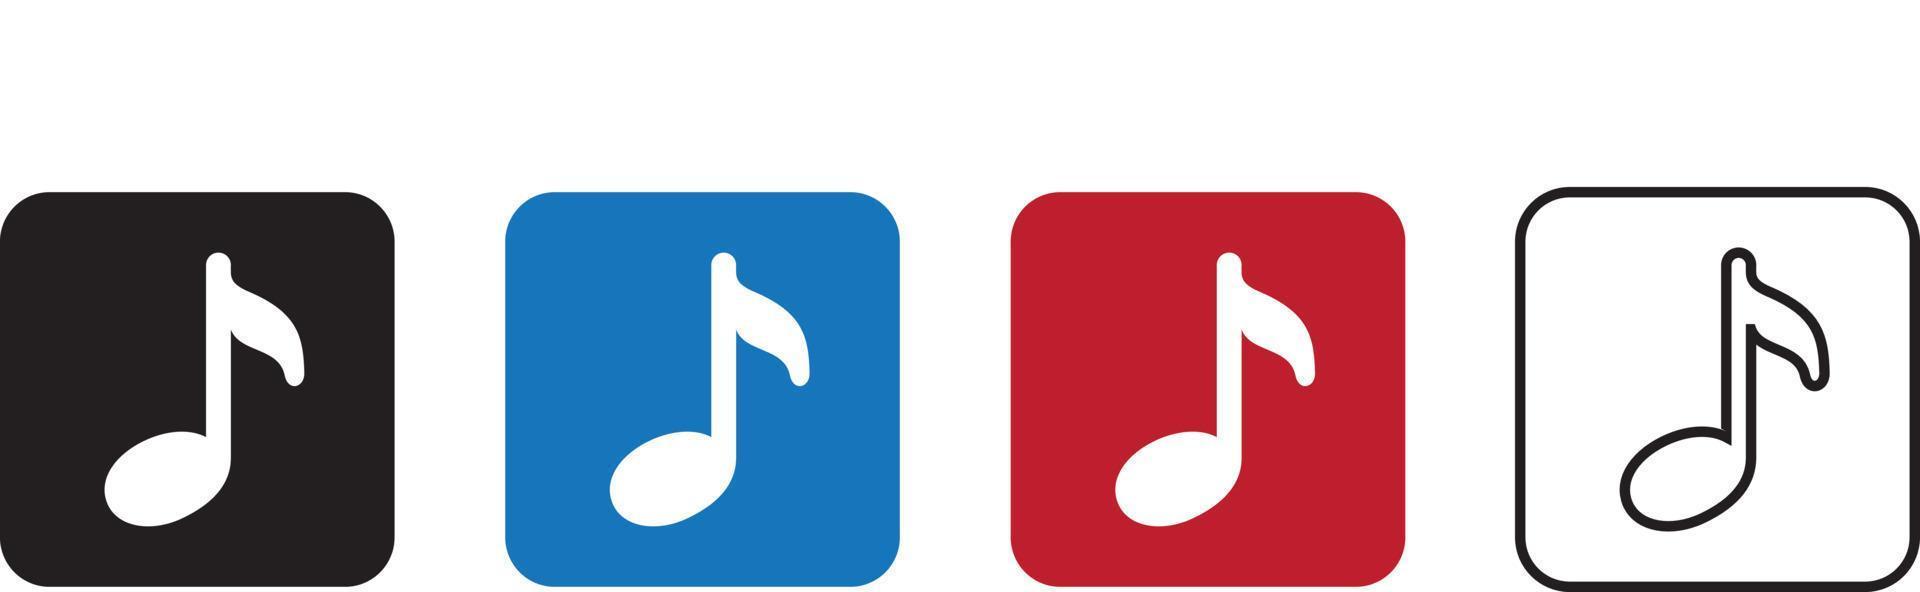 Music, musical notes, music, melody, sound app icon vector design illustration material